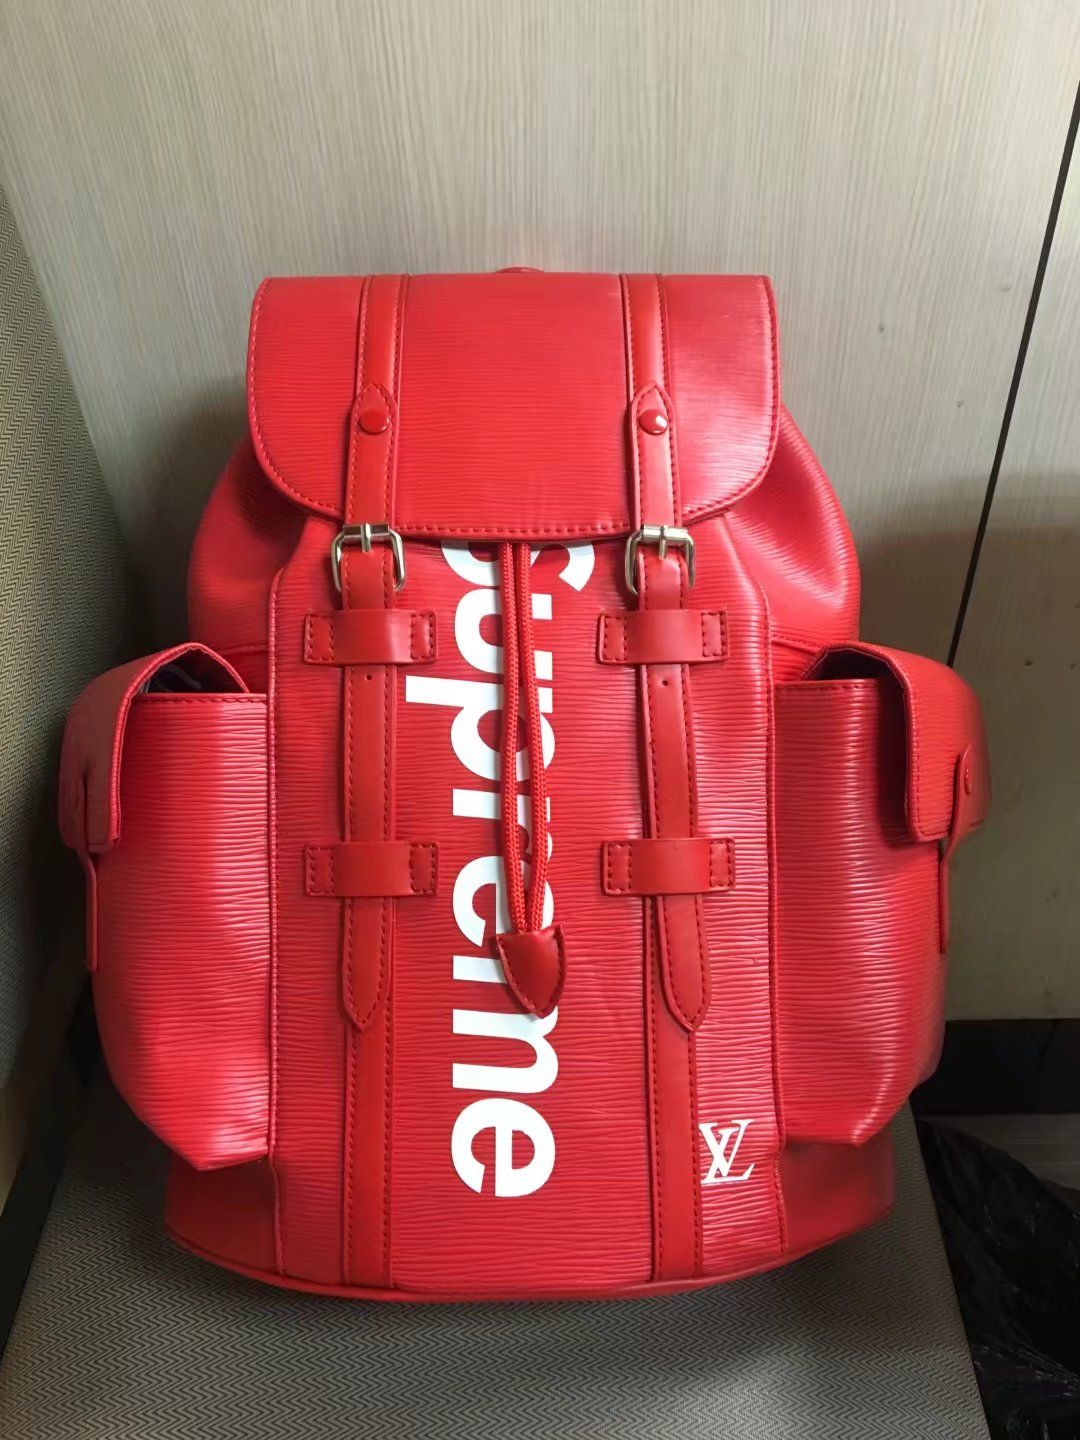 LOUIS VUITTON X SUPREME WOMEN RED LEATHER TRAVEL BAGS MEN BACKPACK SHOULDER BAGS MESSENGER BAGS ...